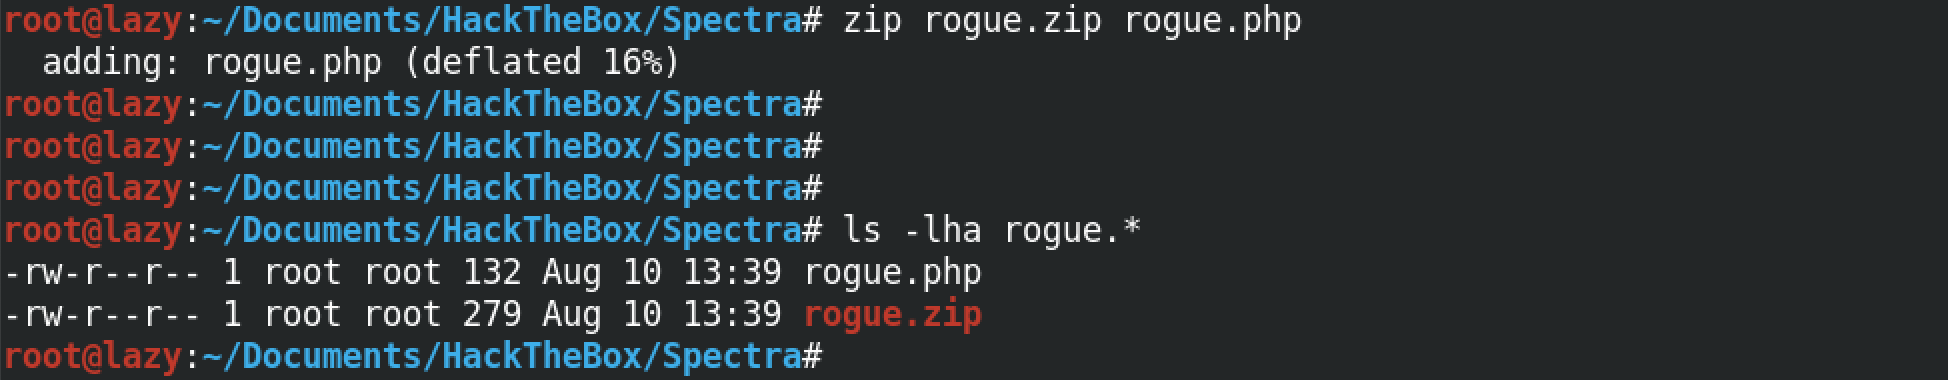 Zipping the malicious PHP plugin file.